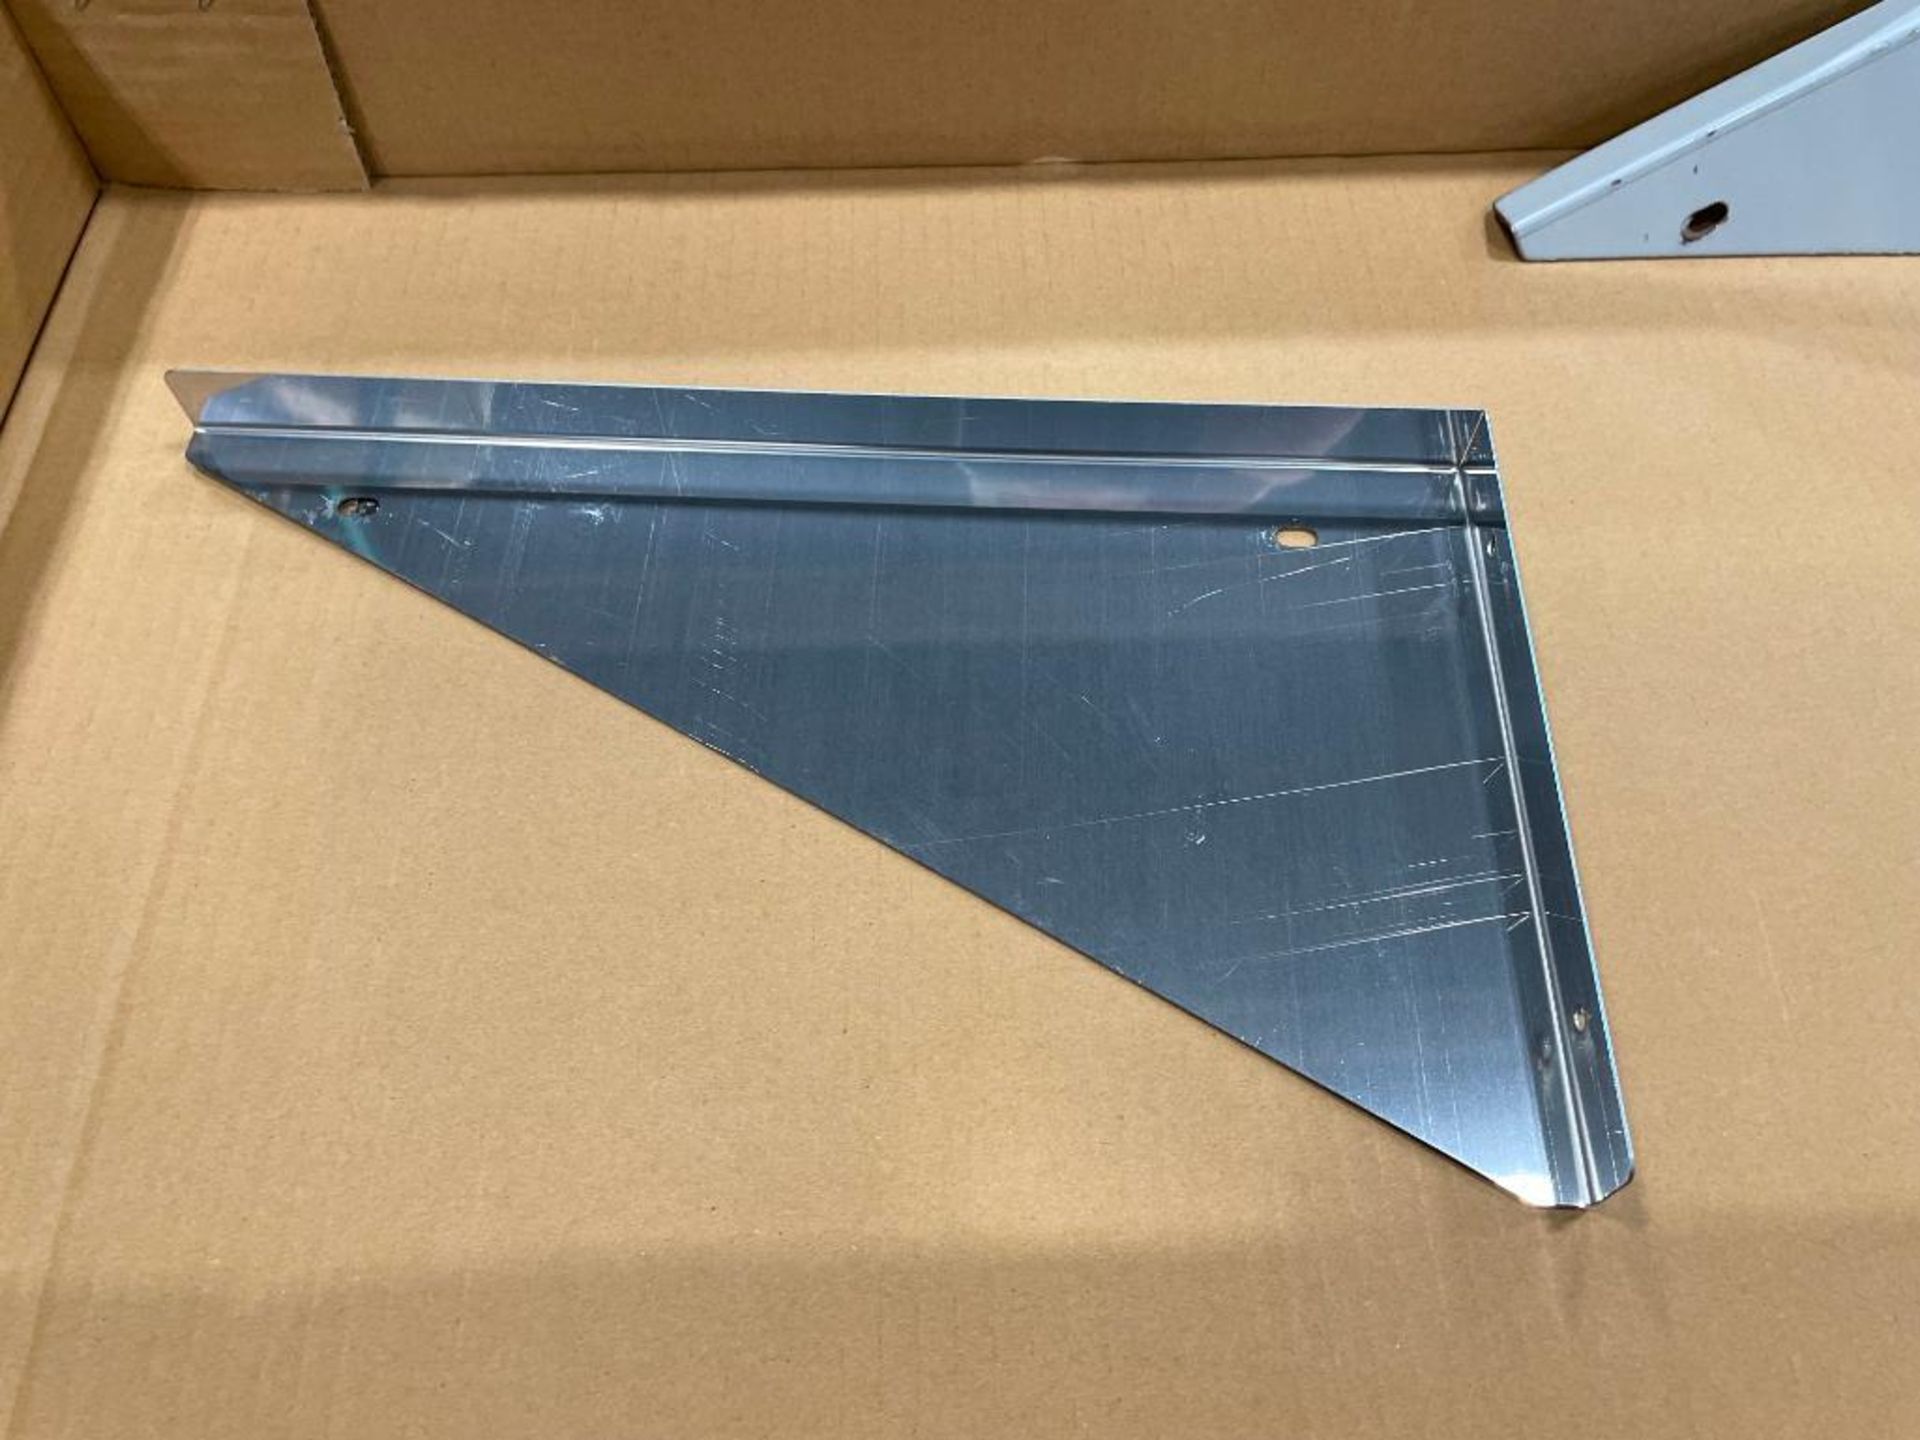 36" X 16" STAINLESS STEEL WALL SHELF - OMCAN 24409 - NEW - Image 11 of 13